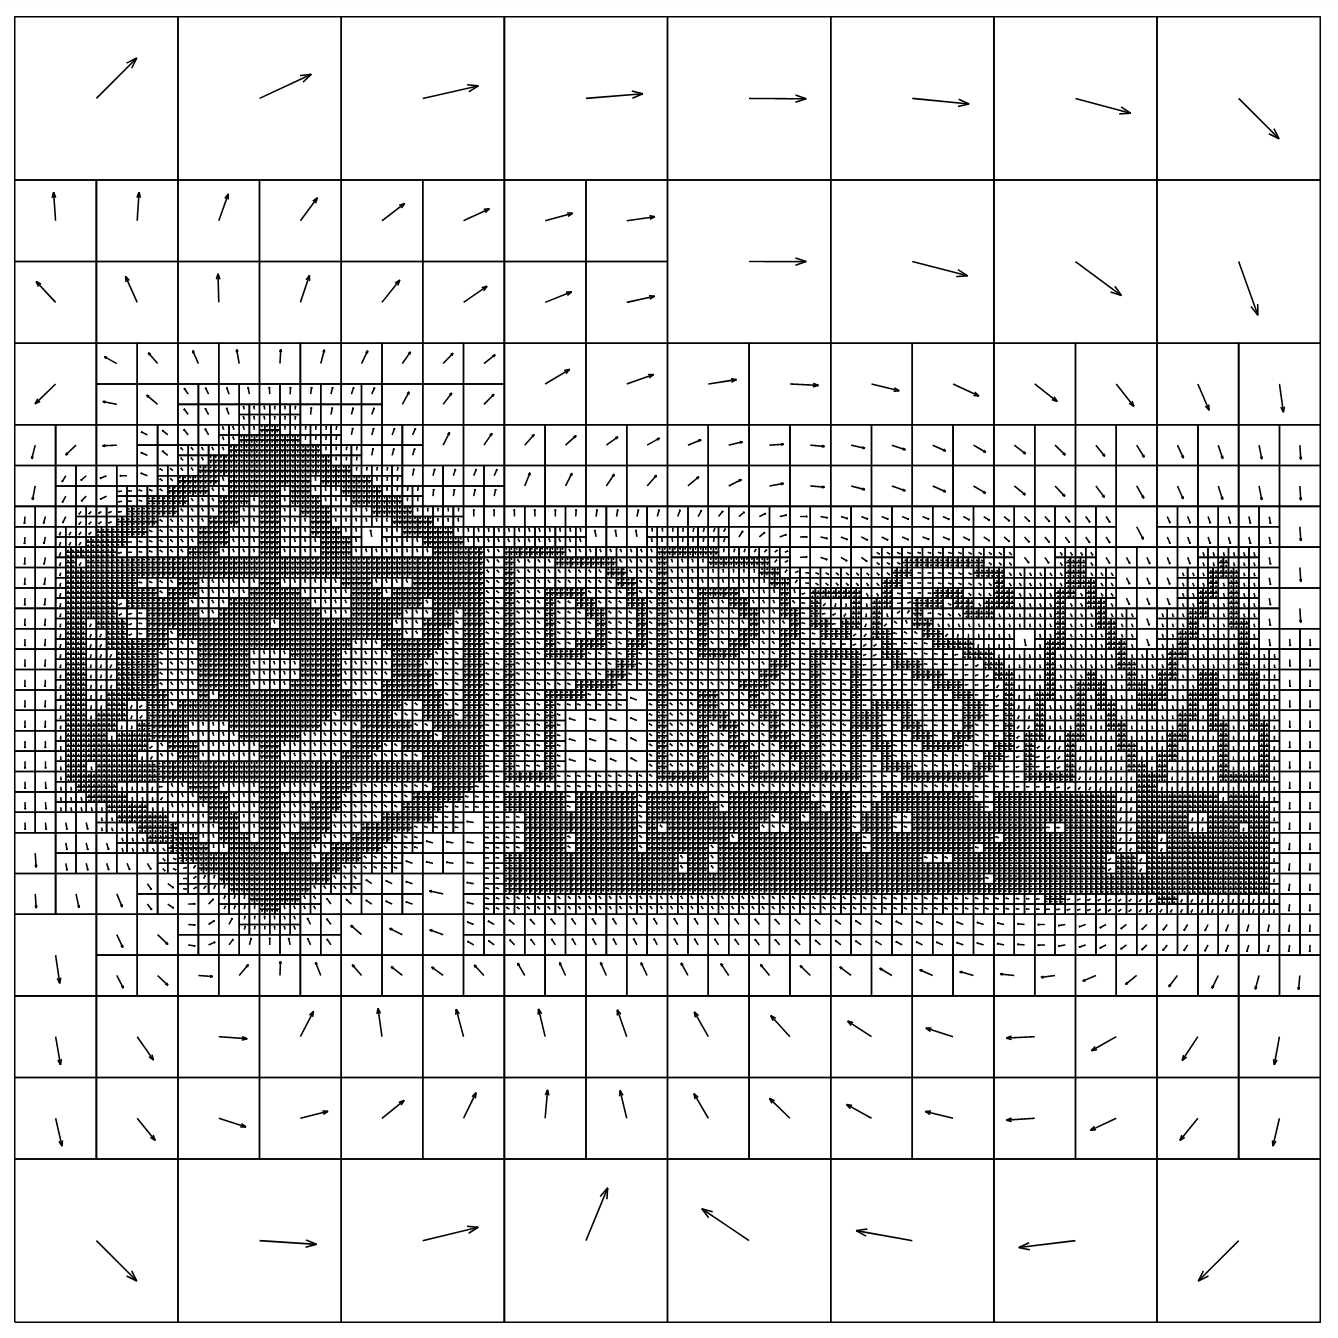 PRiSM Logo represented on a grid by flow arrows of different sizes